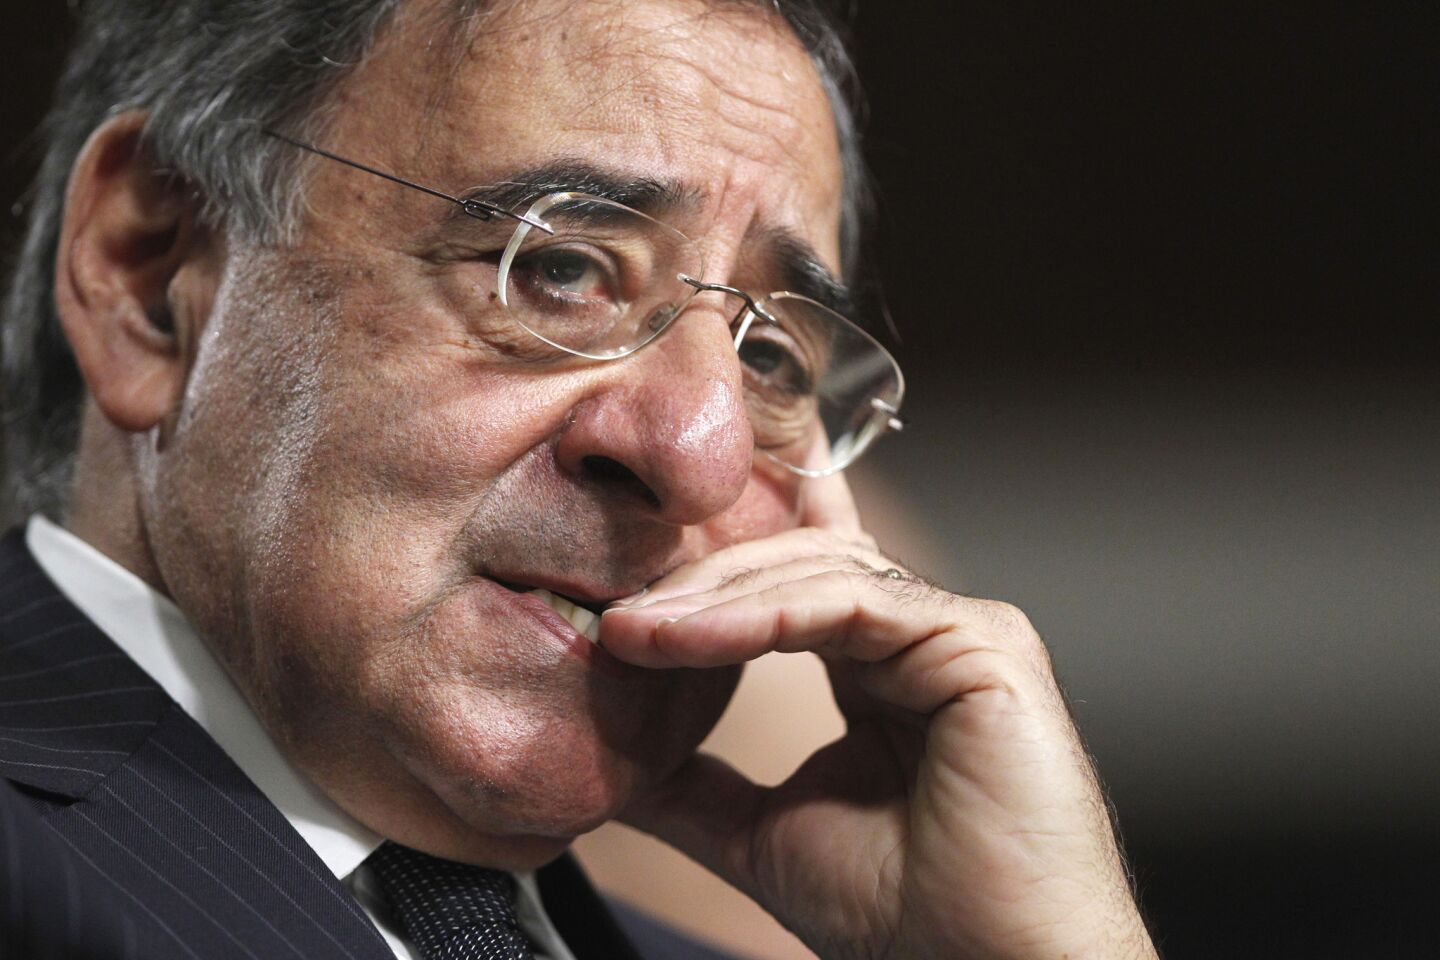 Leon Panetta held not one, but two posts in the Obama administration, initially becoming director of the CIA from 2009 to 2011, and then replacing outgoing Secretary of Defense Robert Gates until 2013. Panetta has returned to his home in California, directs the Panetta Institute for Public Policy and is on the board of Blue Shield of California.